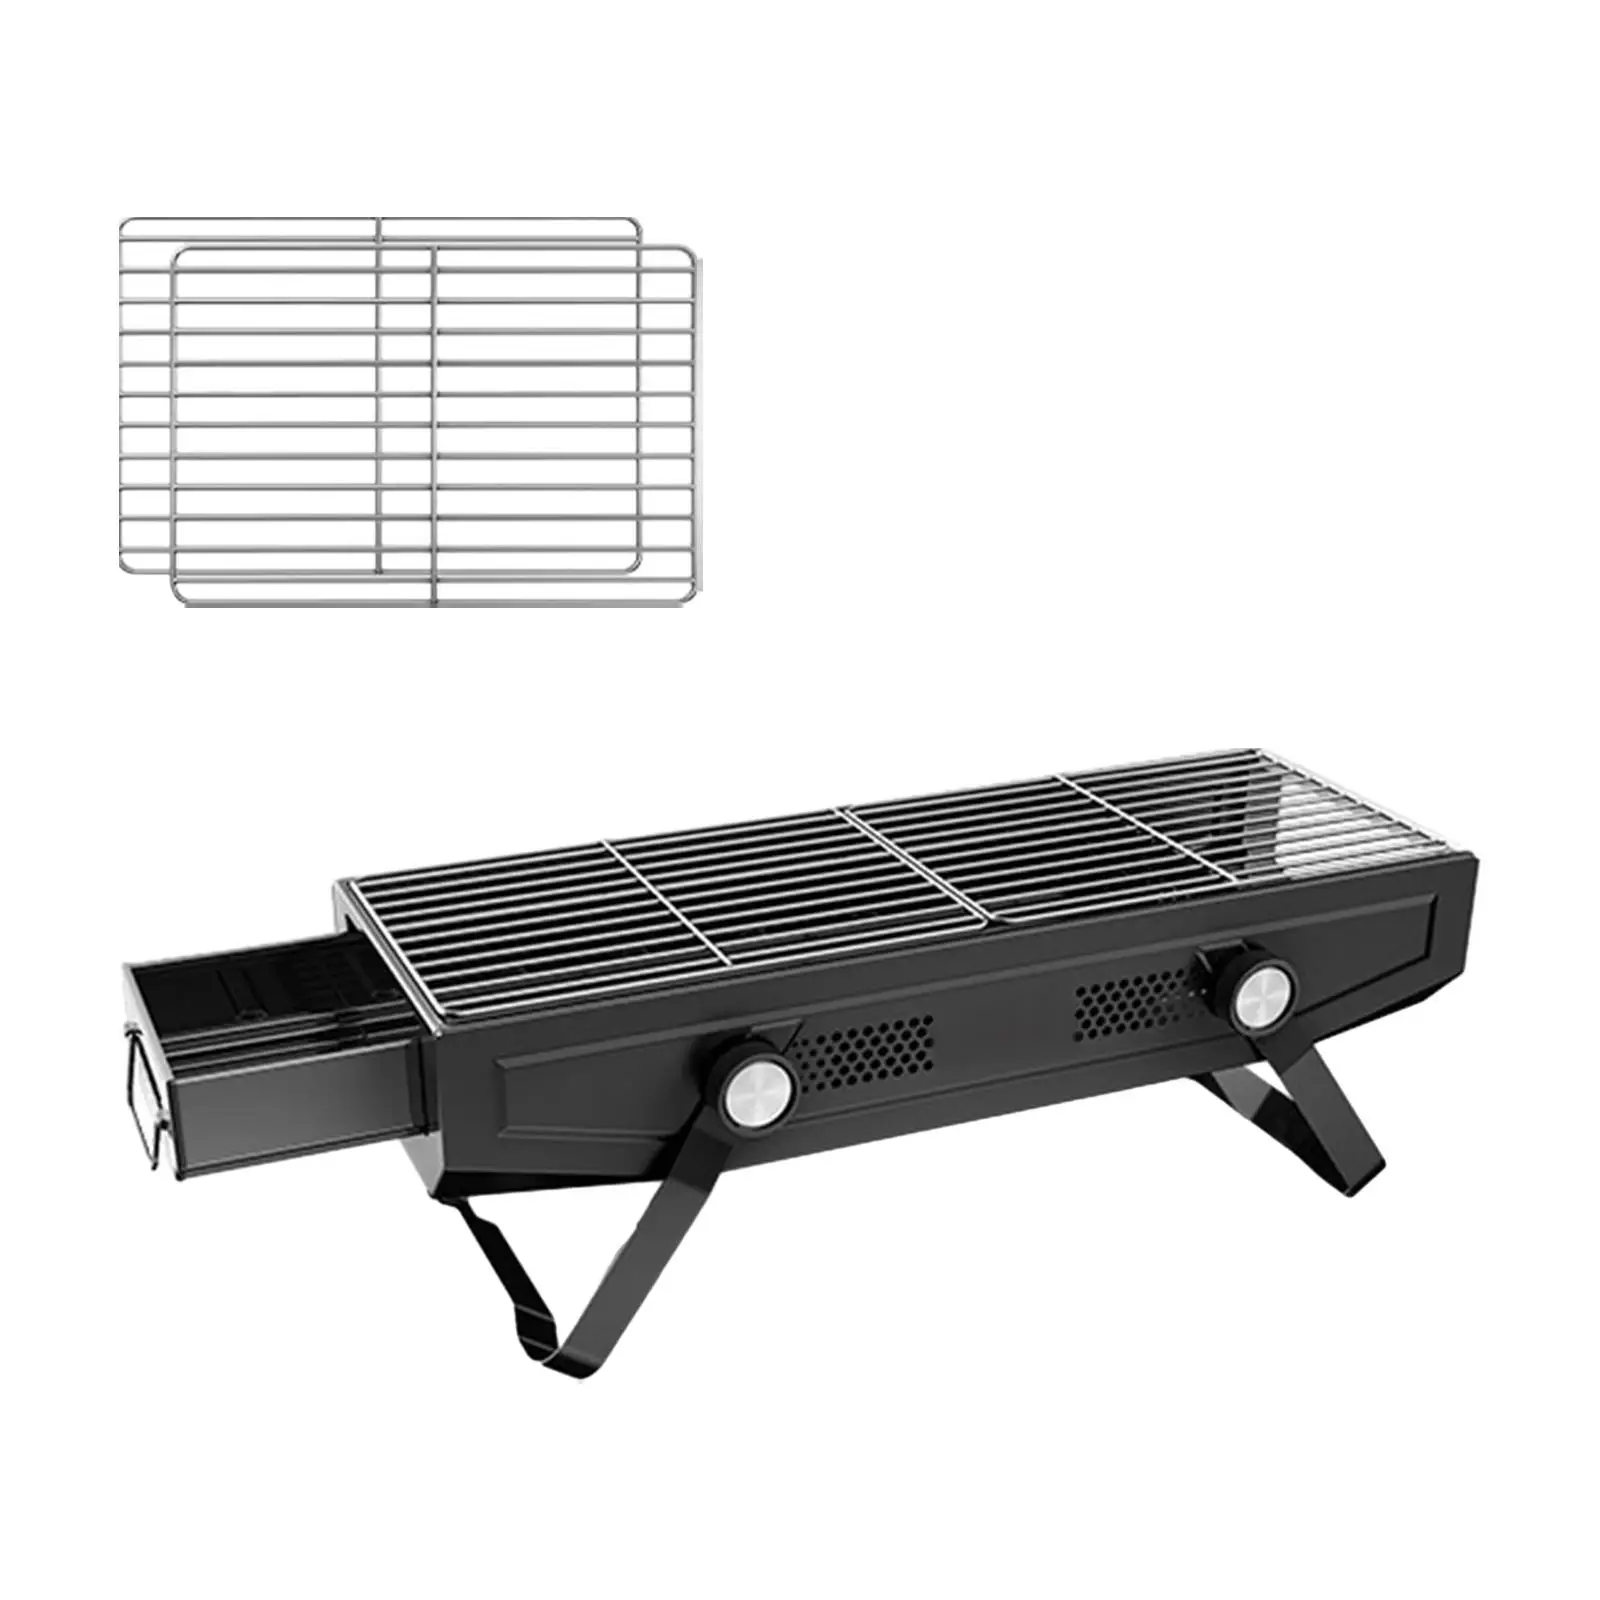 Barbecue Camping Grill Tabletop BBQ Grill Charcoal Wood Burning Grills Folding Grill for Backyard Garden Home Traveling Beach